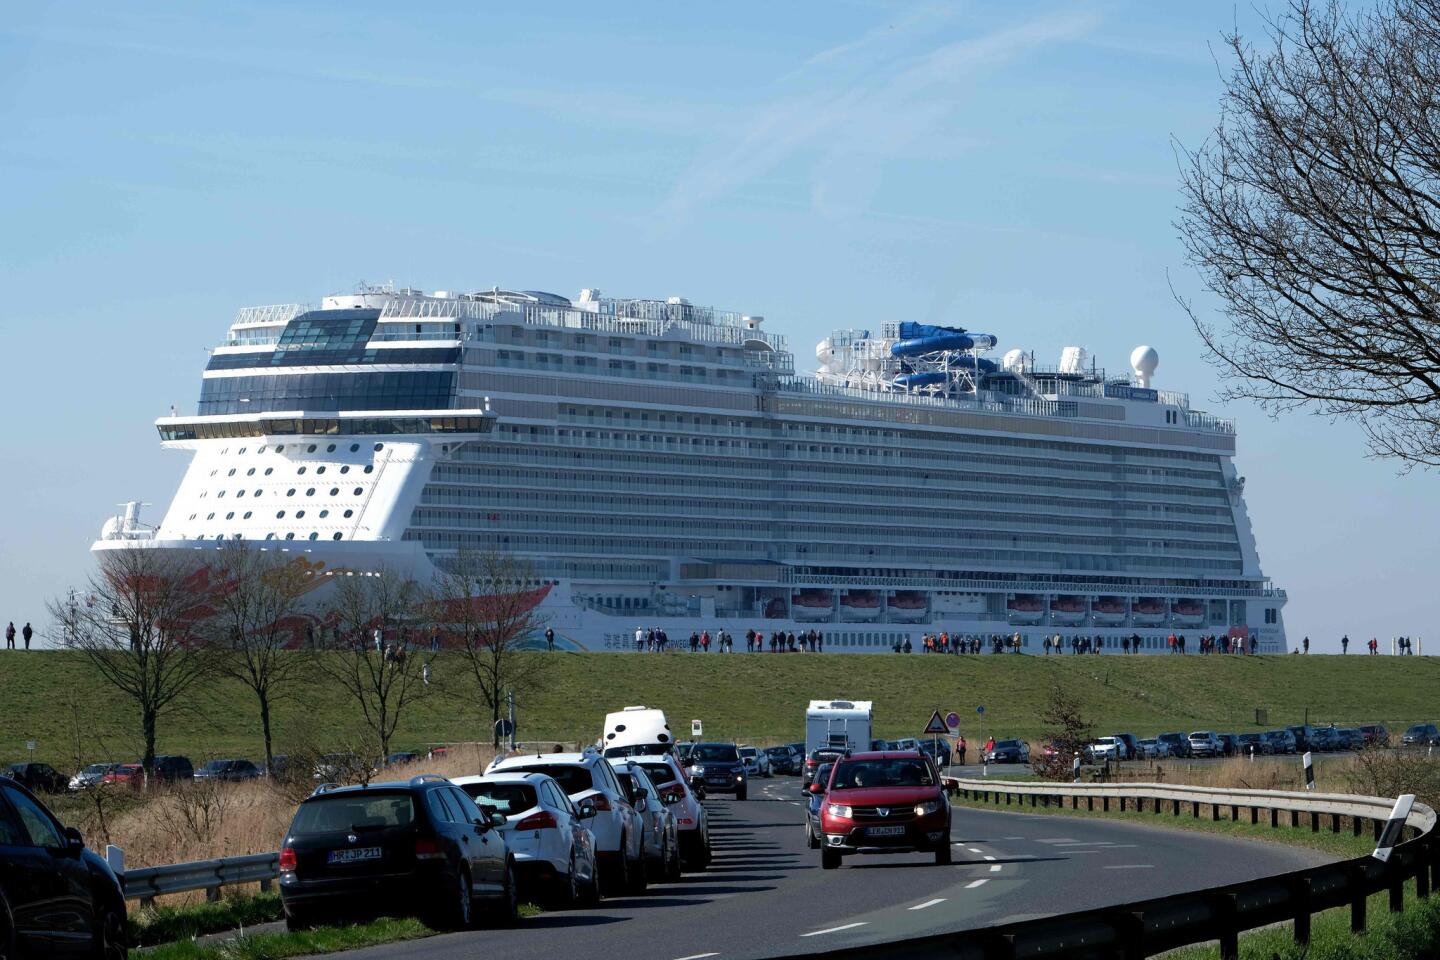 The "Norwegian Joy" cruise ship, previously named "Norwegian Bliss", makes its way over the river Ems near Emden, northern Germany, on March 27, 2017. The ship of the Norwegian Cruise Line, that was built at the Meyer Werft shipyard in Papenburg, northern Germany, is made ready to enter service. Final technical and nautical tests are due to be carried out during the following days on the North Sea. / AFP PHOTO / PATRIK STOLLARZPATRIK STOLLARZ/AFP/Getty Images ** OUTS - ELSENT, FPG, CM - OUTS * NM, PH, VA if sourced by CT, LA or MoD **